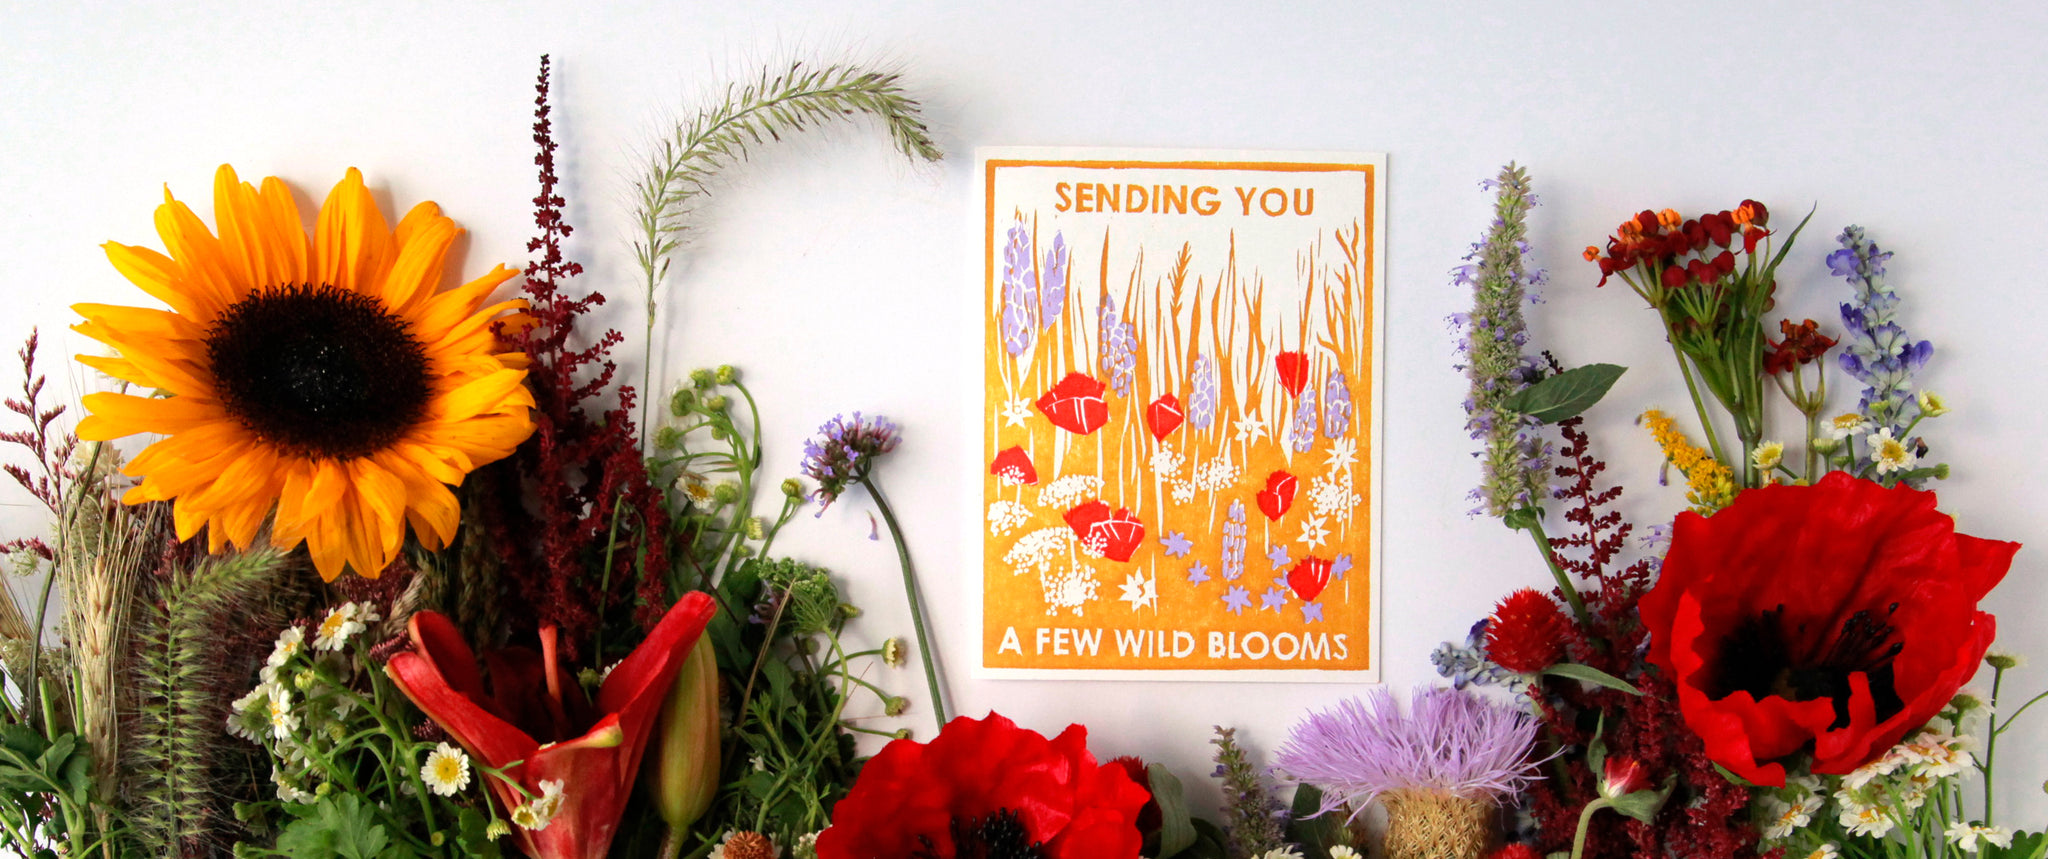 letterpress card that says "sending you a few wild blooms" surrounded by fresh flowers